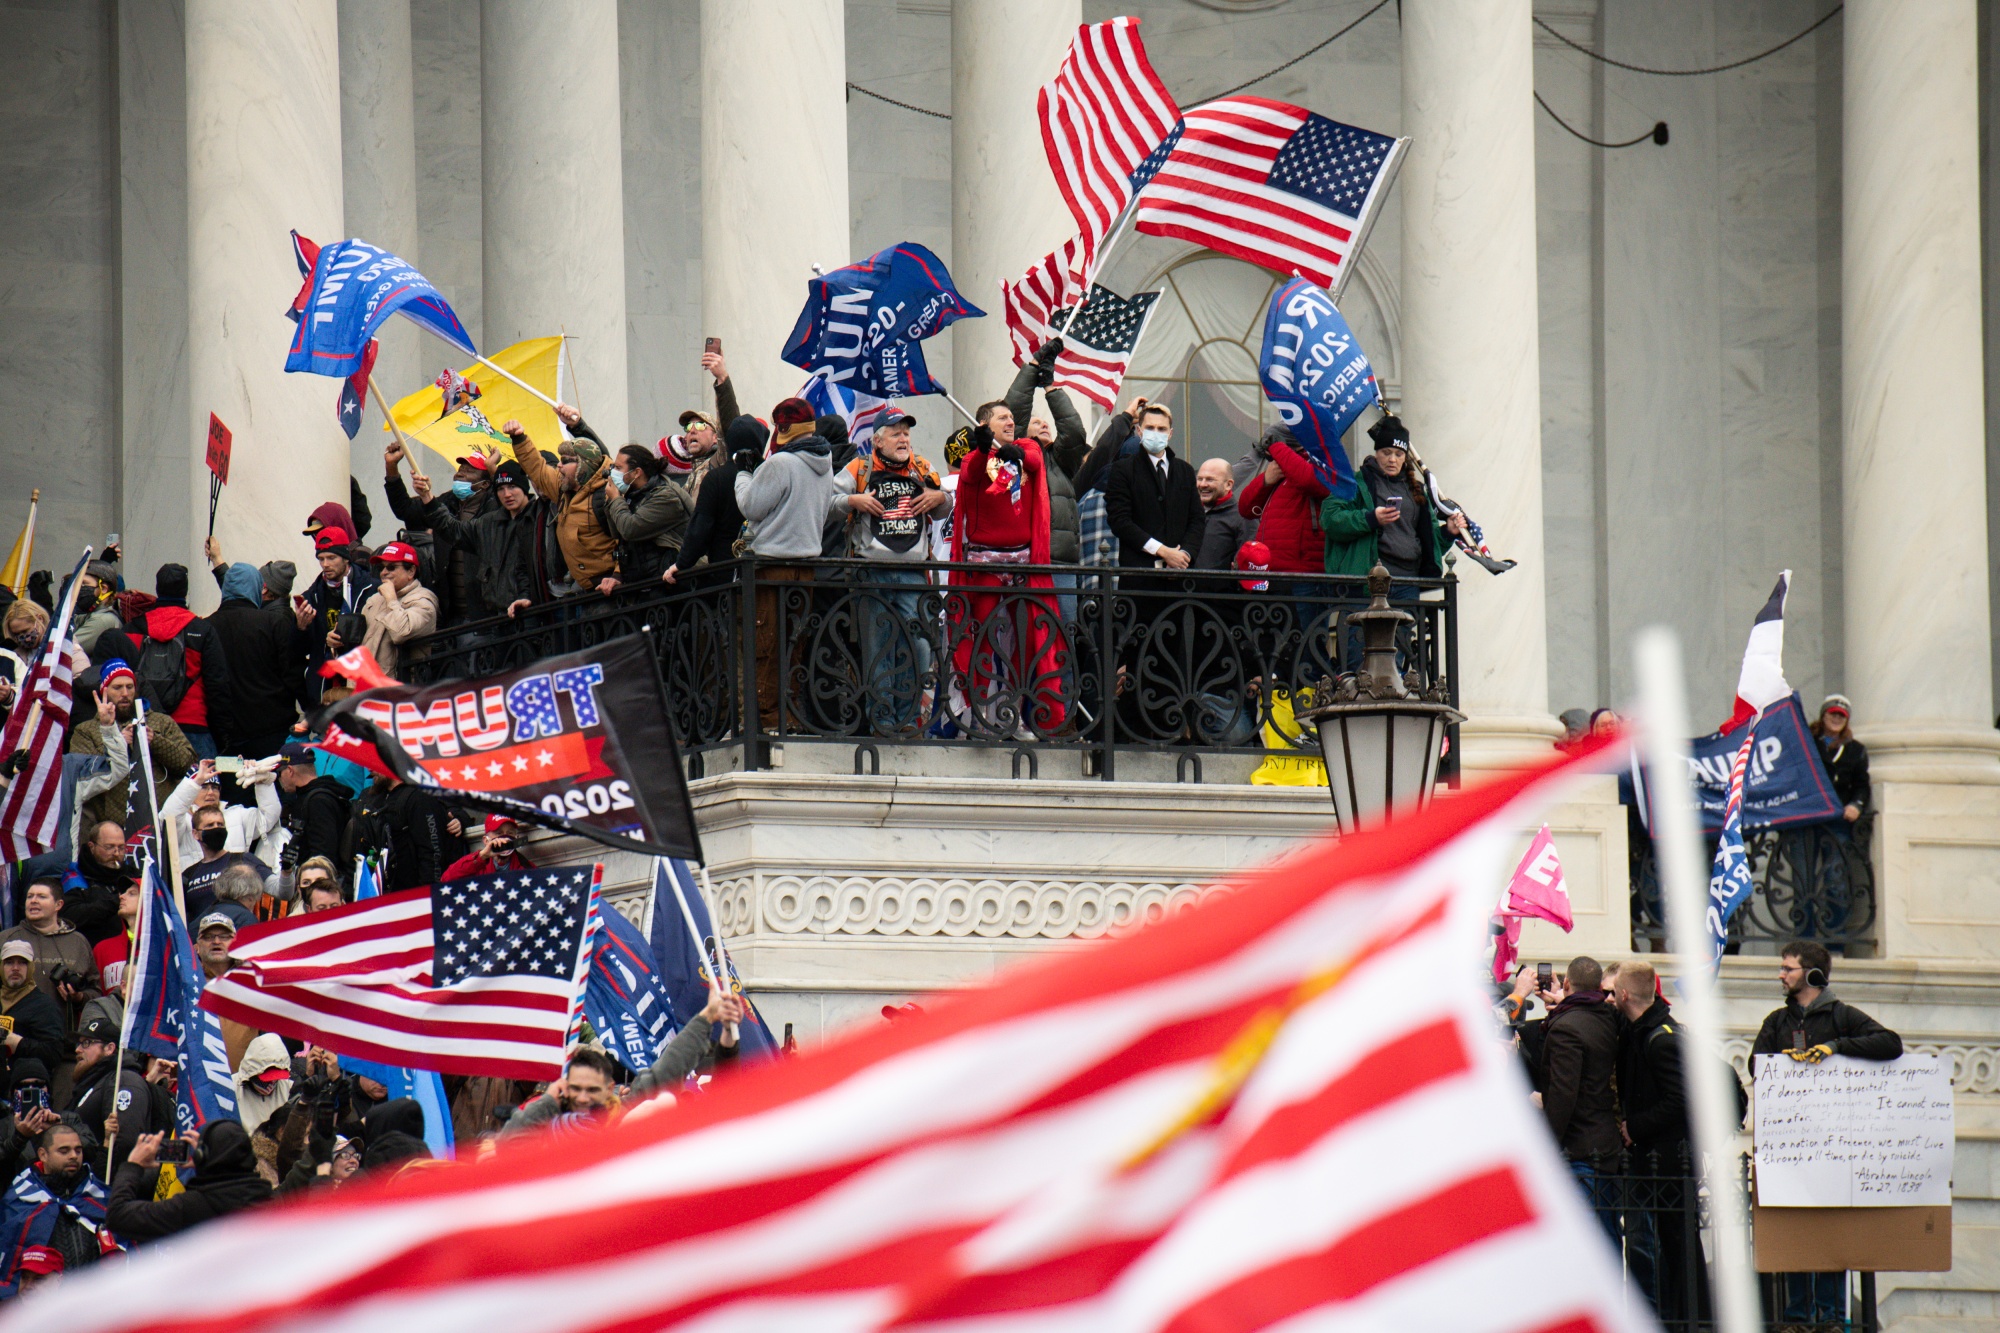 Demonstrators enter the U.S. Capitol after breaching security fencing during a protest in Washington, DC on Jan. 6, 2021.&nbsp;